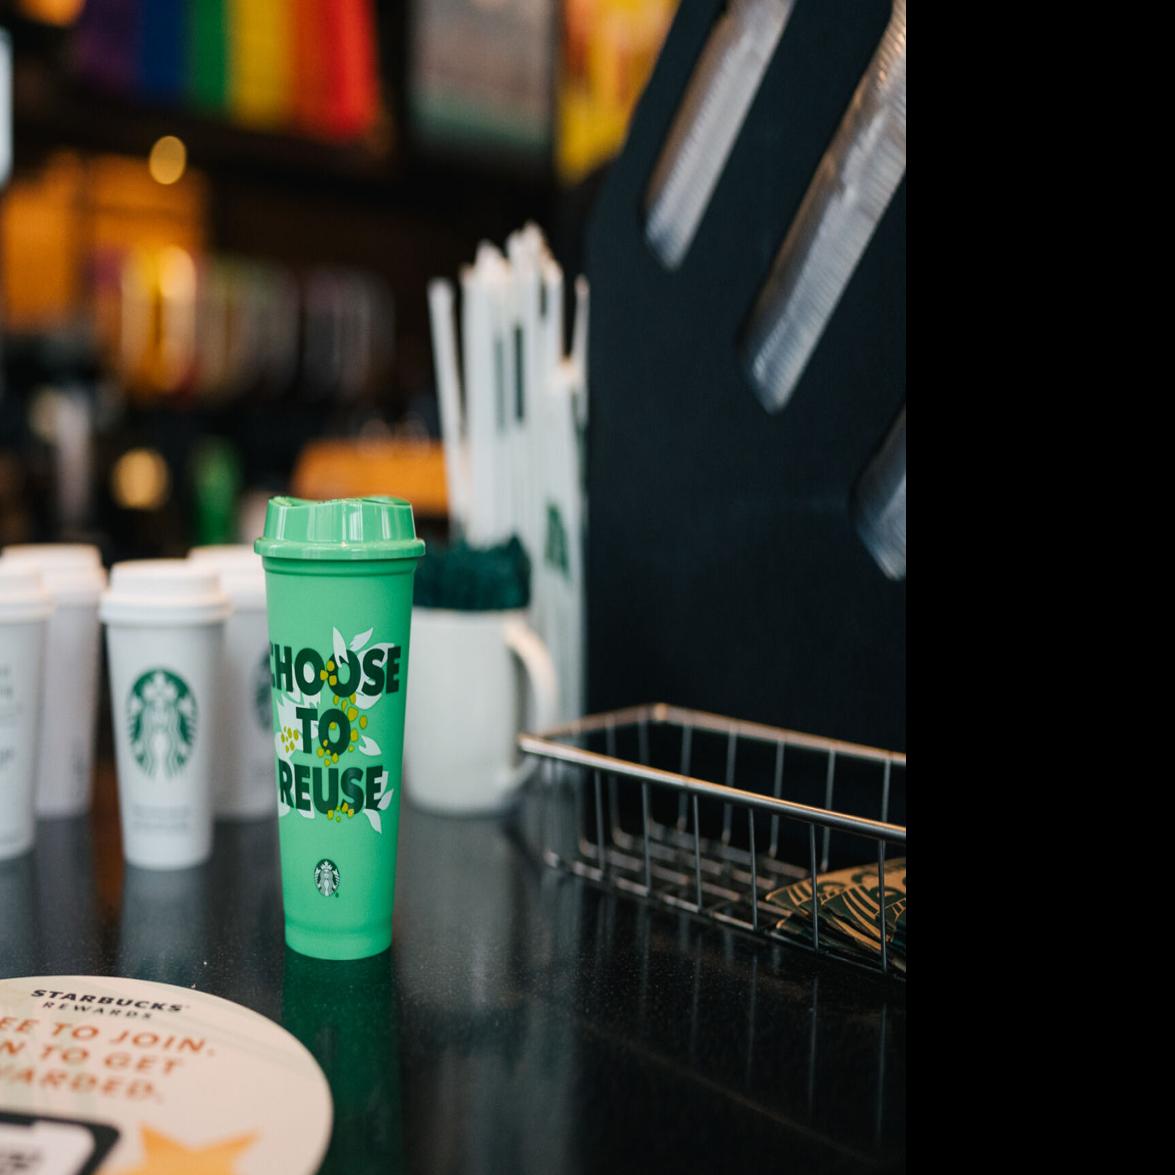 How to get your free Starbucks reusable red cup on Nov. 17